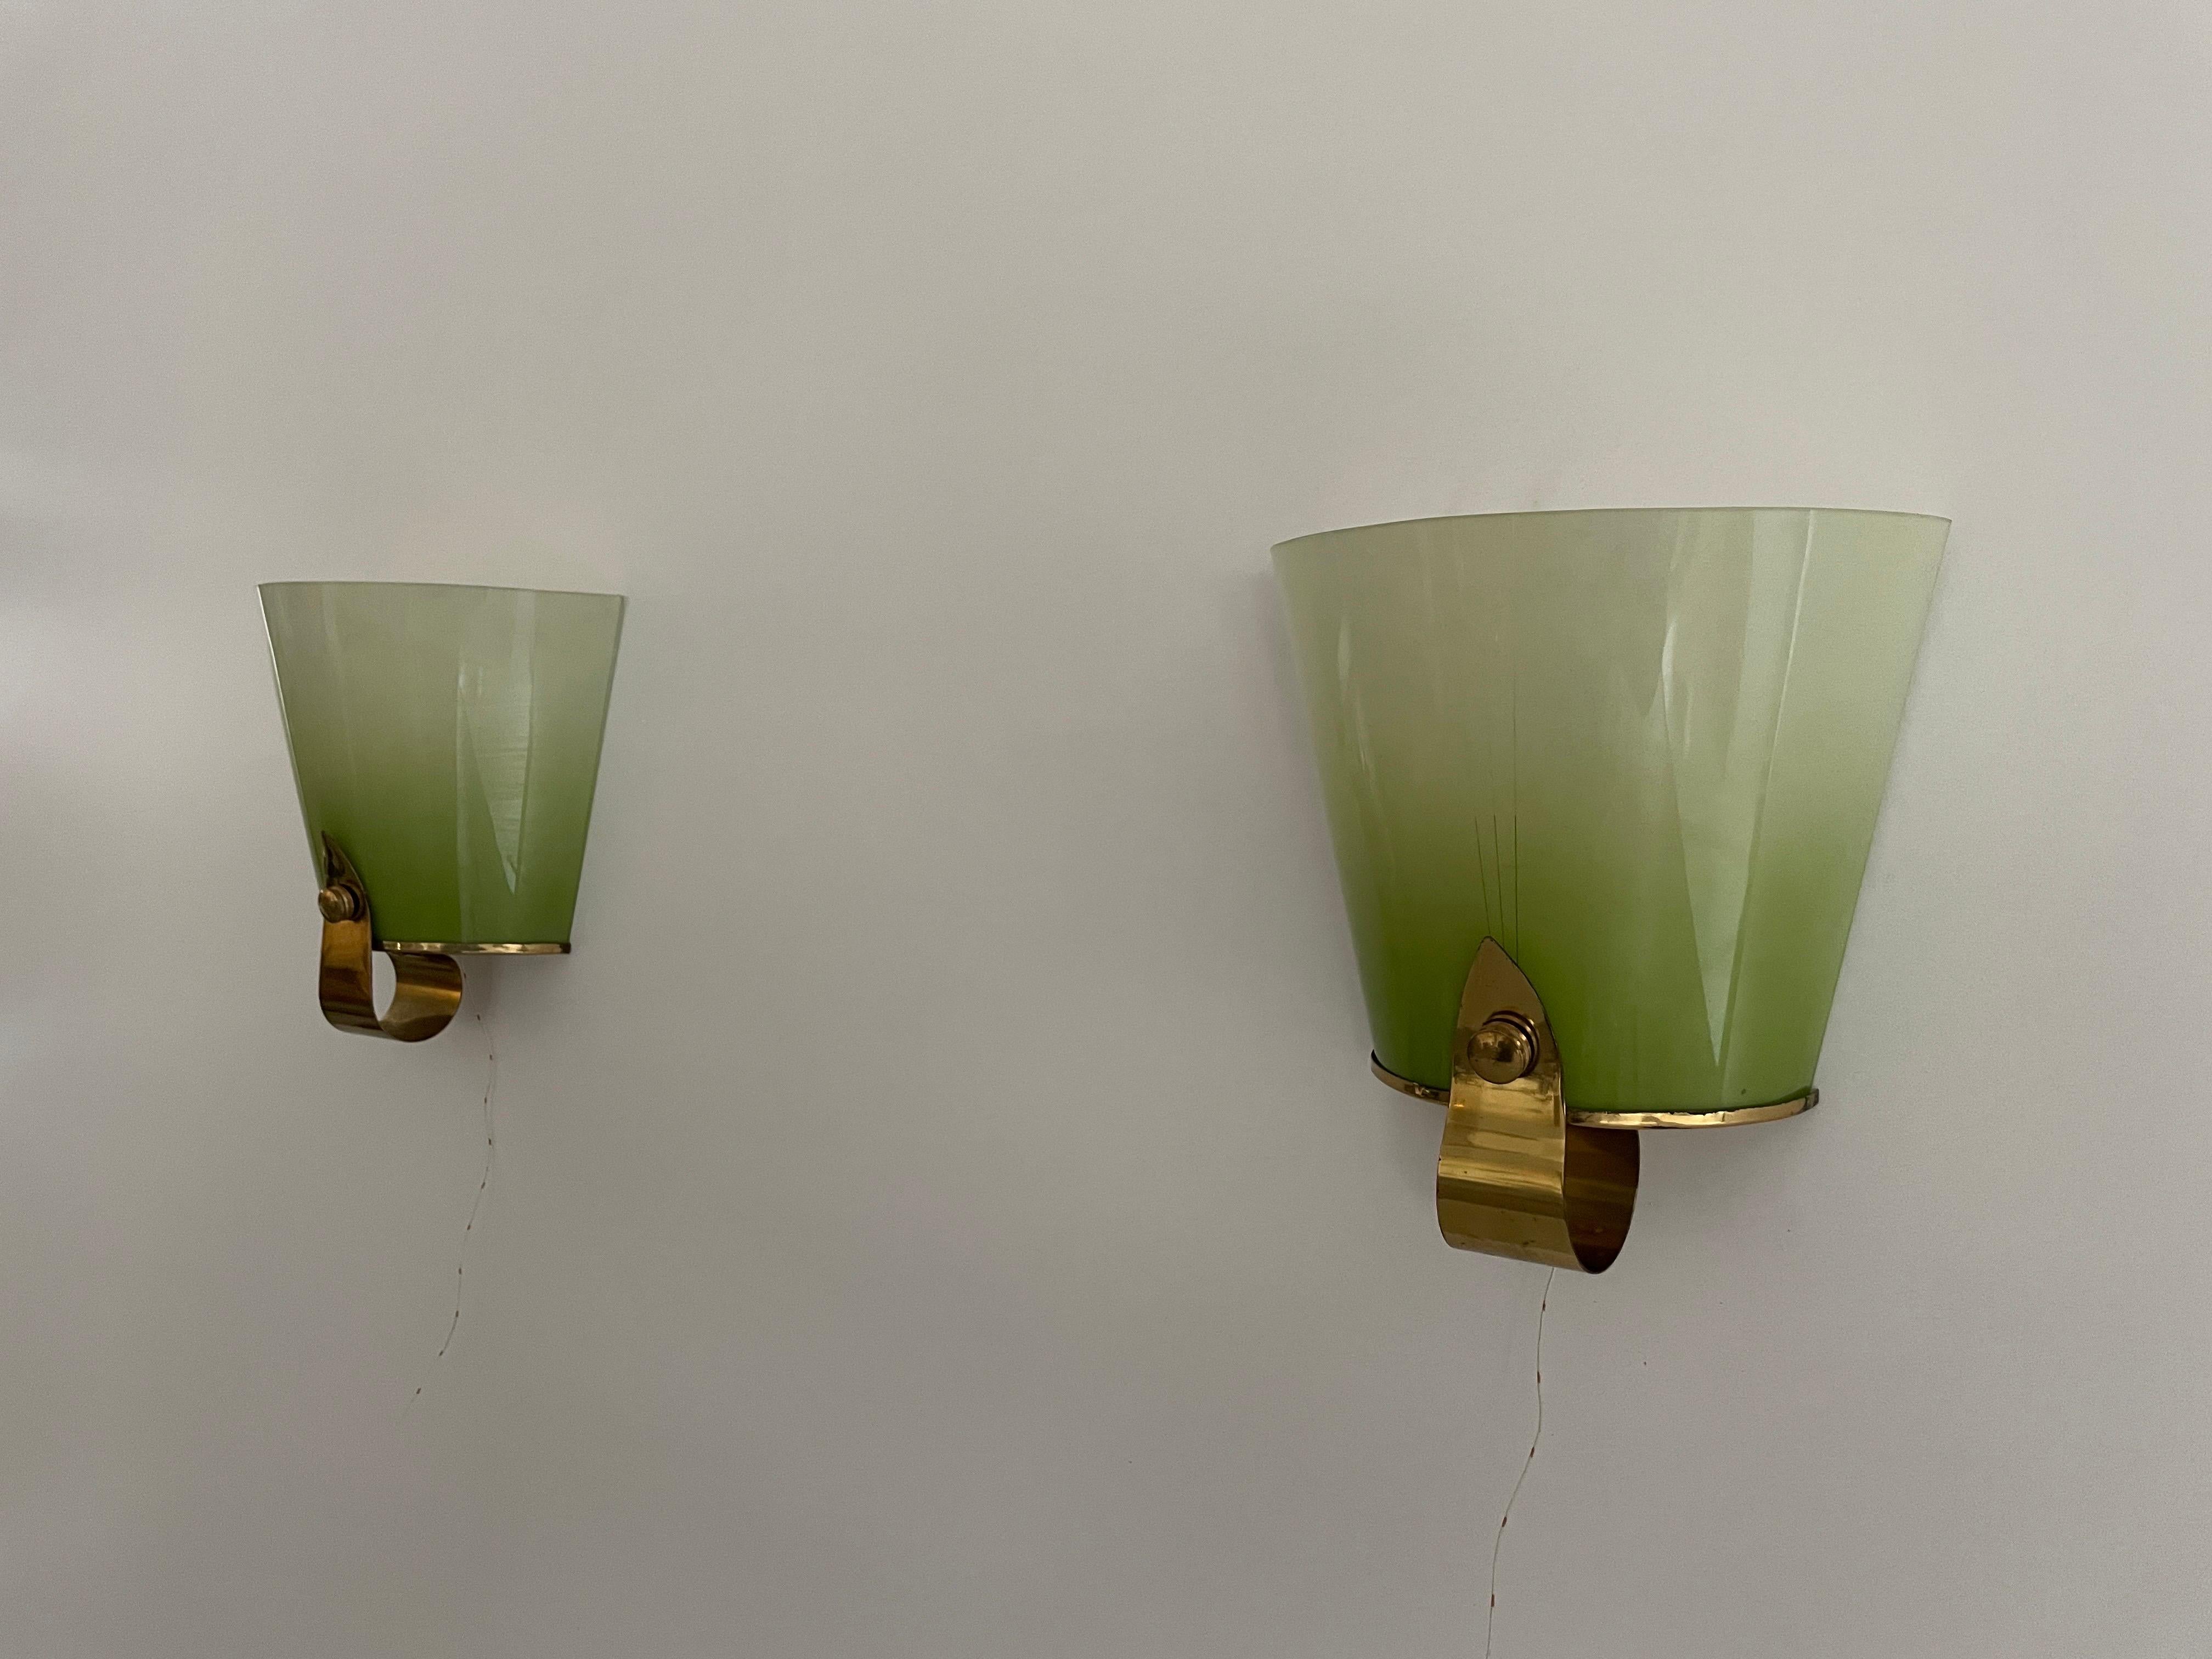 Beautiful Green Glass & Brass Pair of Sconces, 1960s, Germany

Very elegant and minimal design wall lamps
Lamp is in very good condition.

These lamps works with E27 standard light bulbs. 
Wired and suitable to use in all countries. (110-220